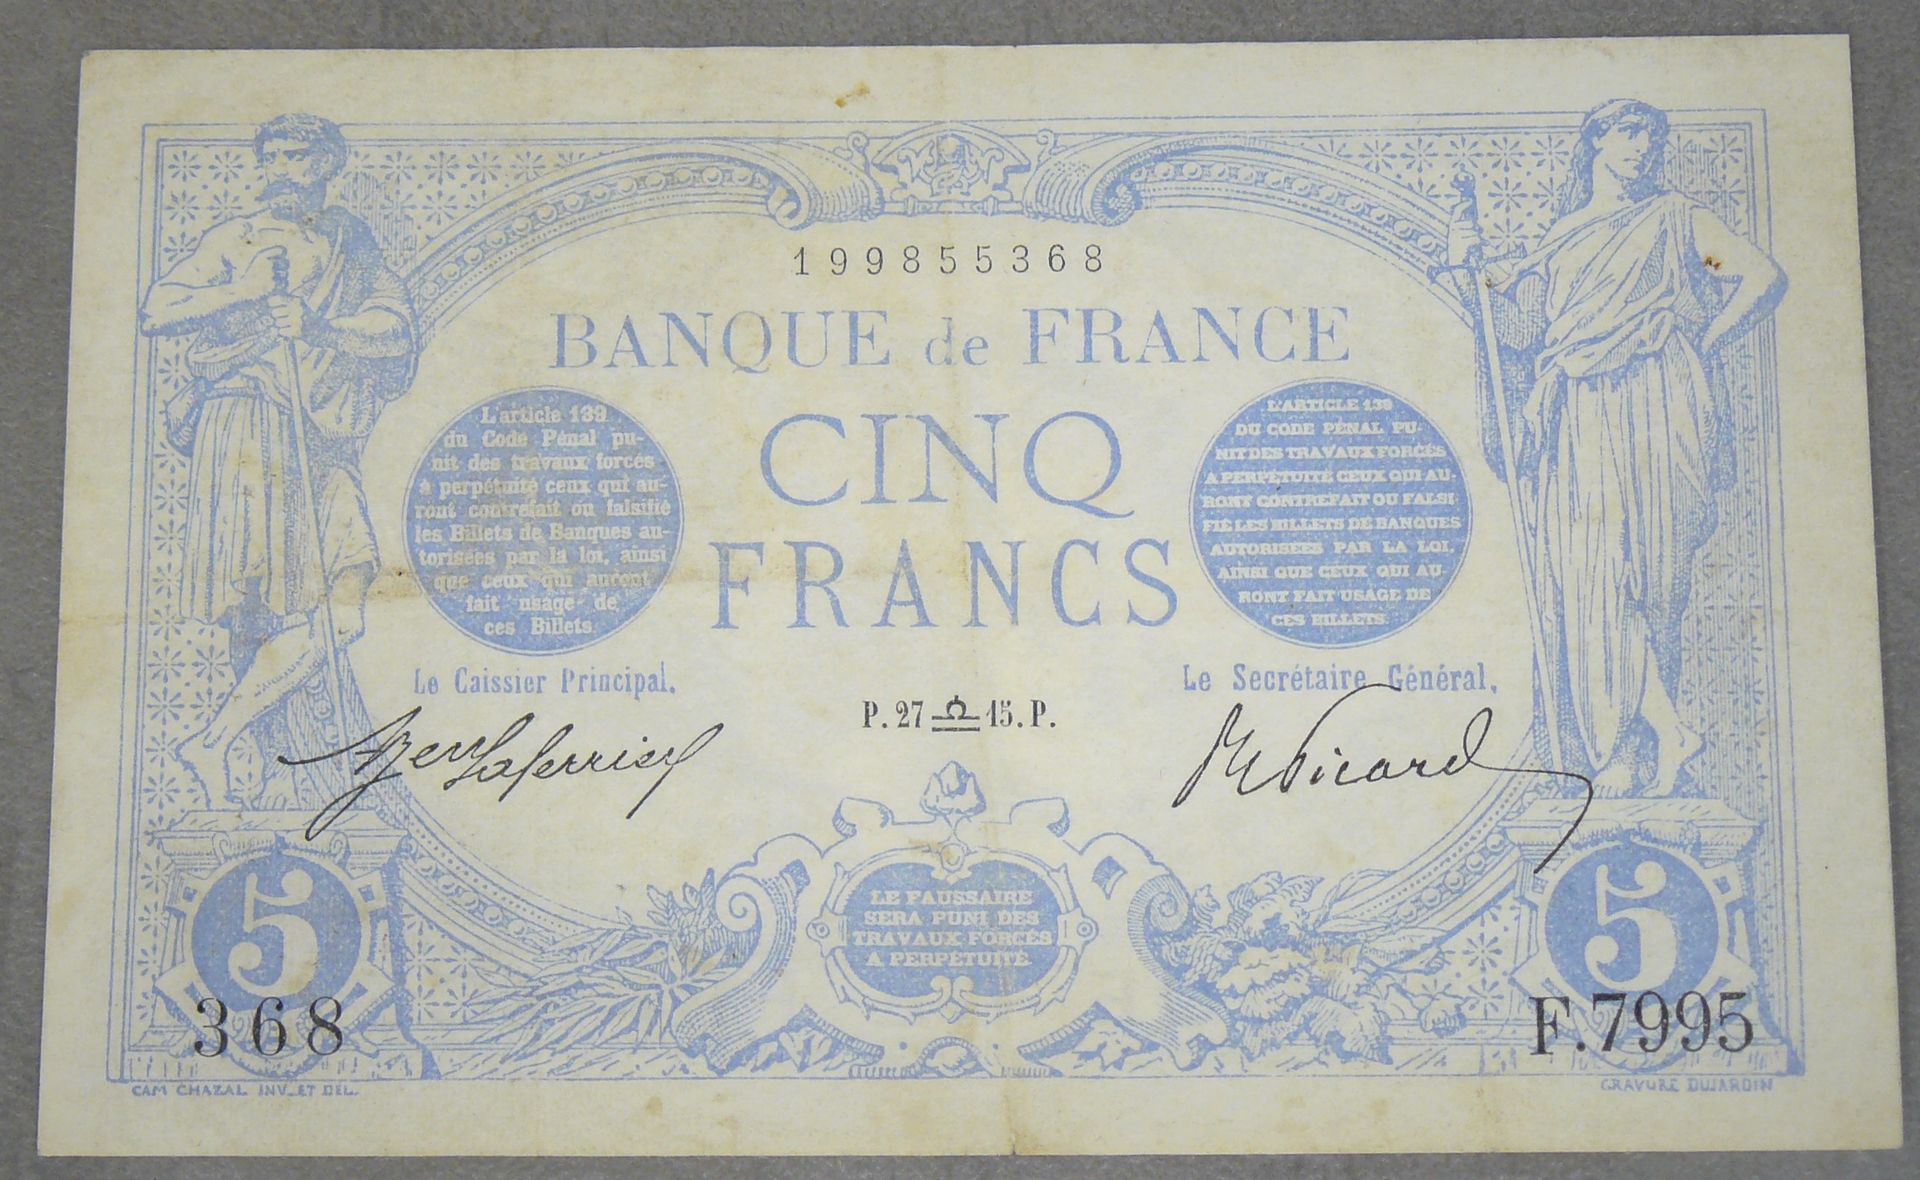 Null 5 FRANCS (BLUE) - 1905型 - Fayette 2 (31) - 1915年9月 (Scale) - 字母7995 F - VF &hellip;